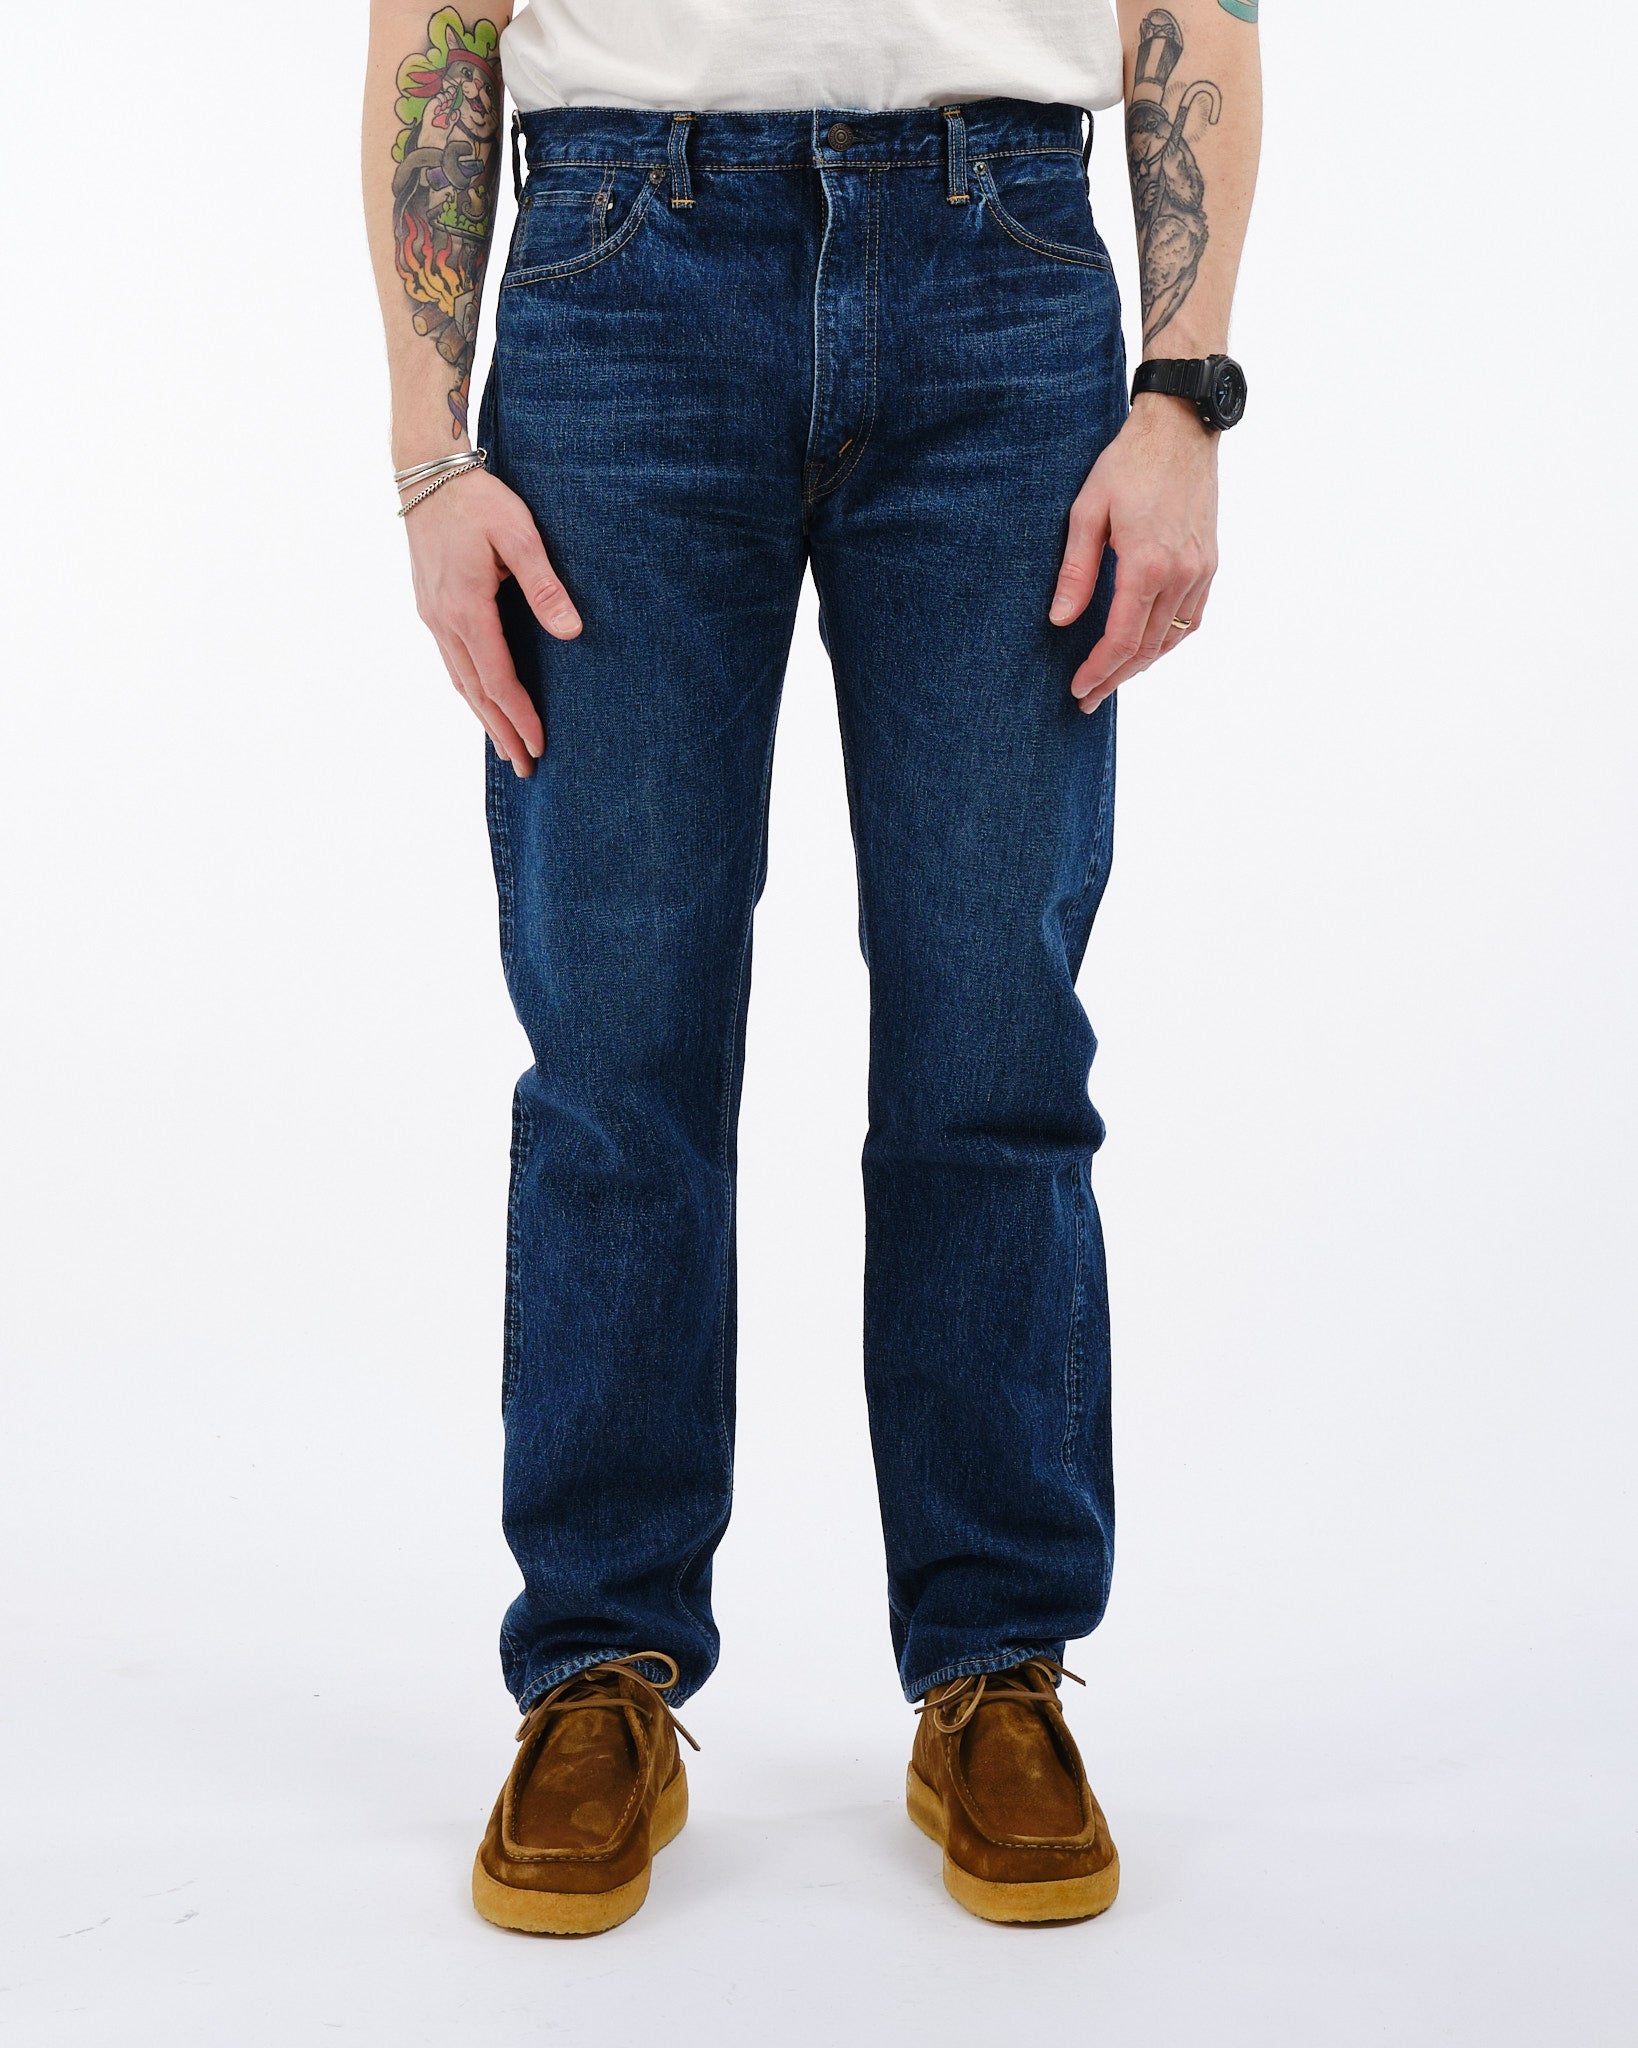 107 Ivy Fit Selvedge Denim Jeans 2 Year Wash - Meadow